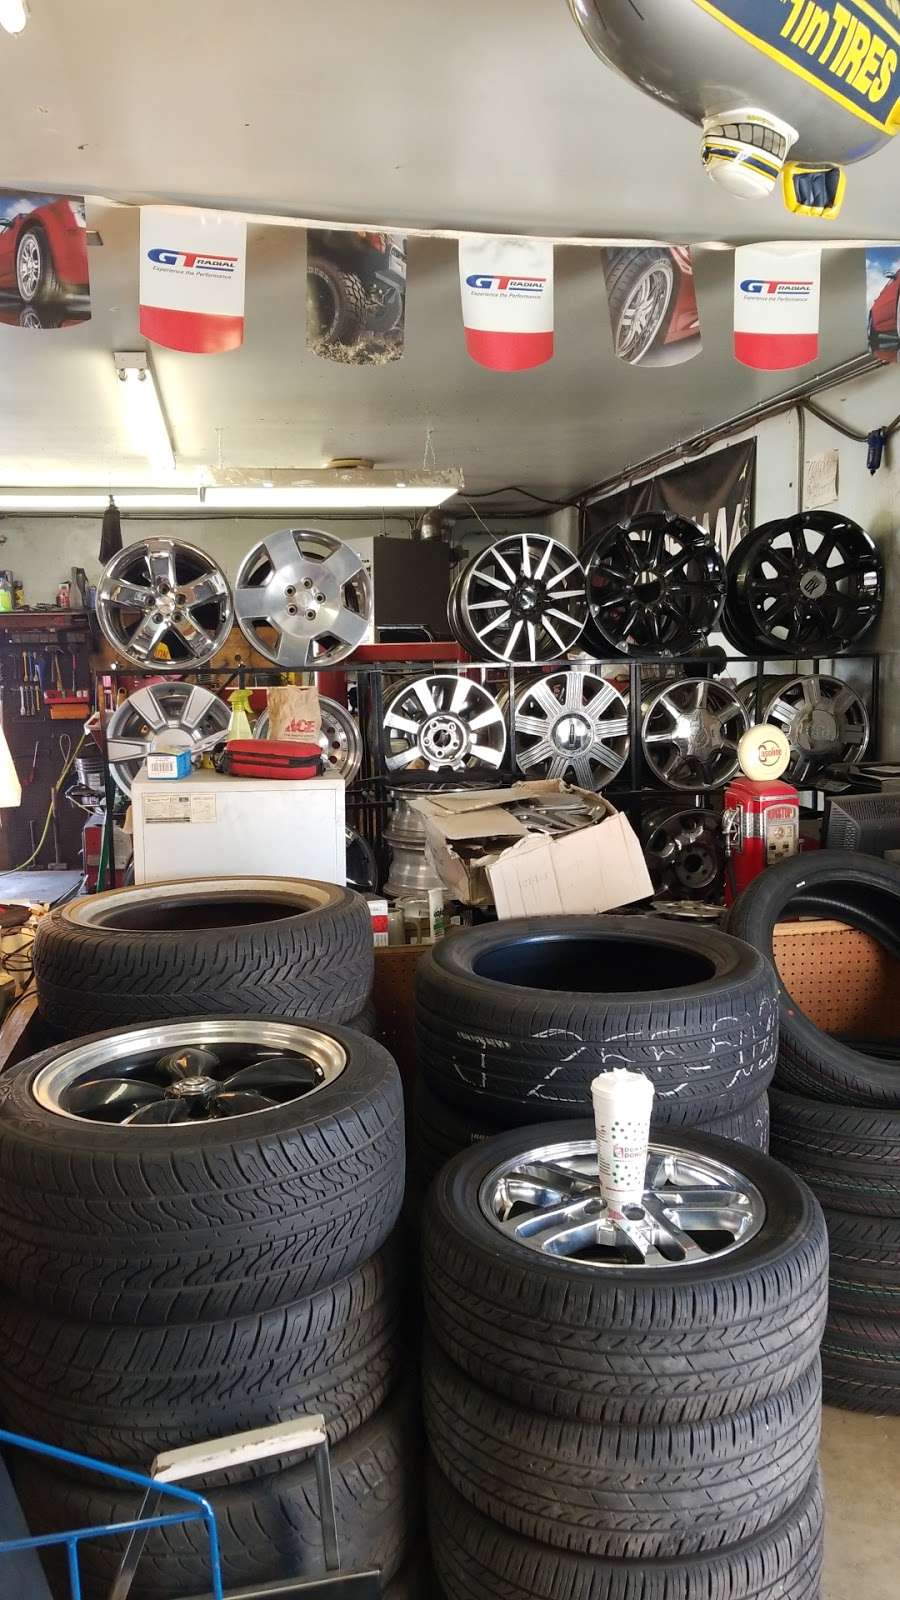 Wess Wheels & Tires | 6225 Kennedy Ave, Hammond, IN 46323 | Phone: (219) 513-9391